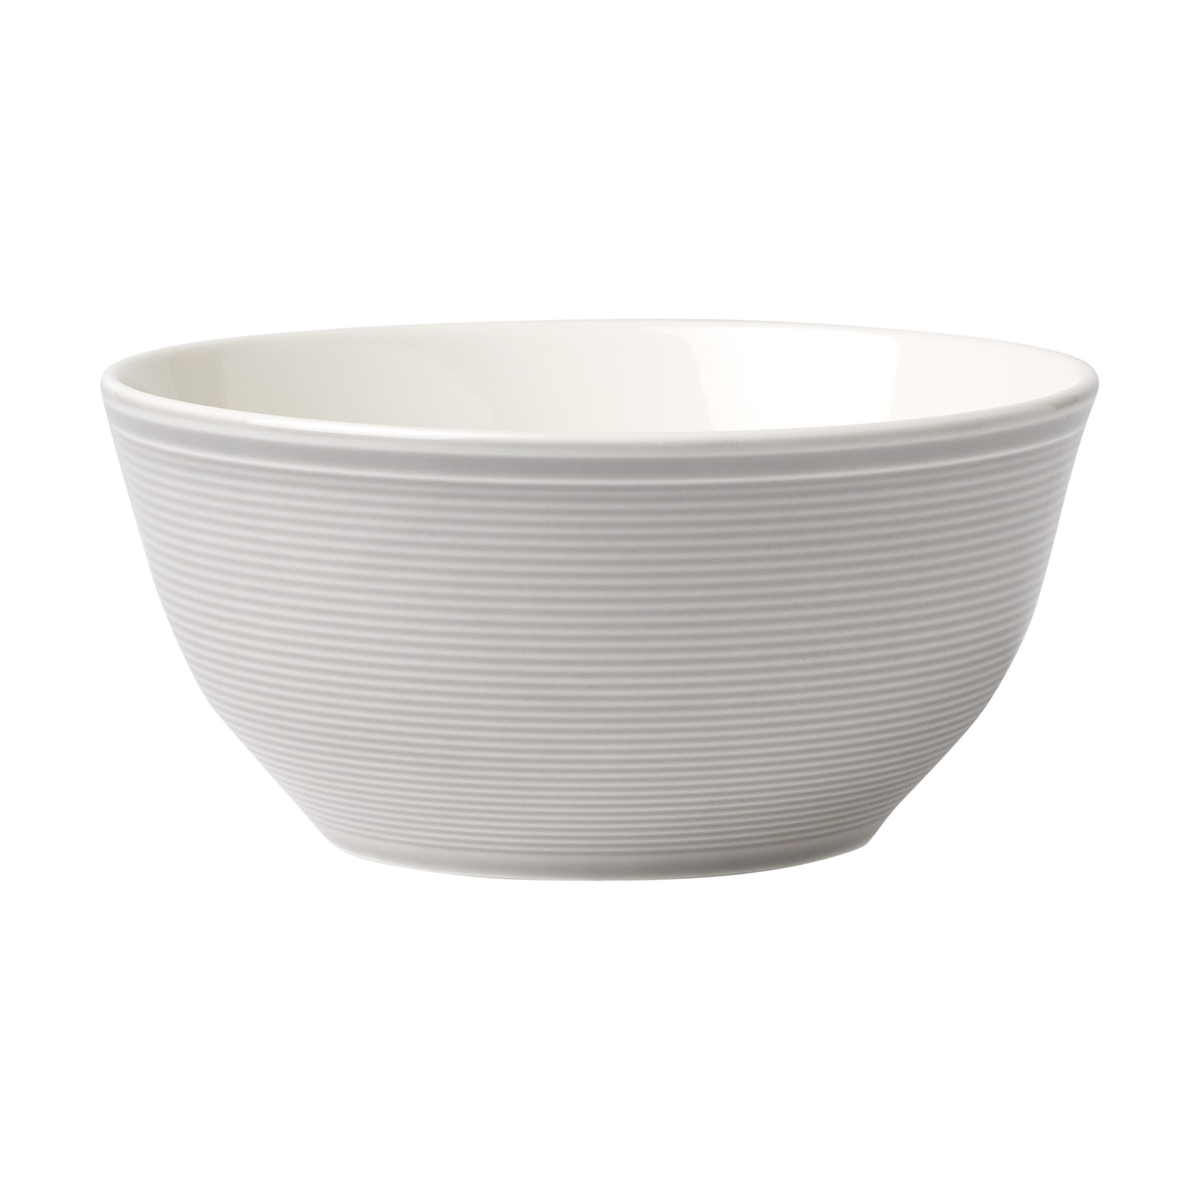 Villeroy and Boch Color Loop Stone Rice Bowl